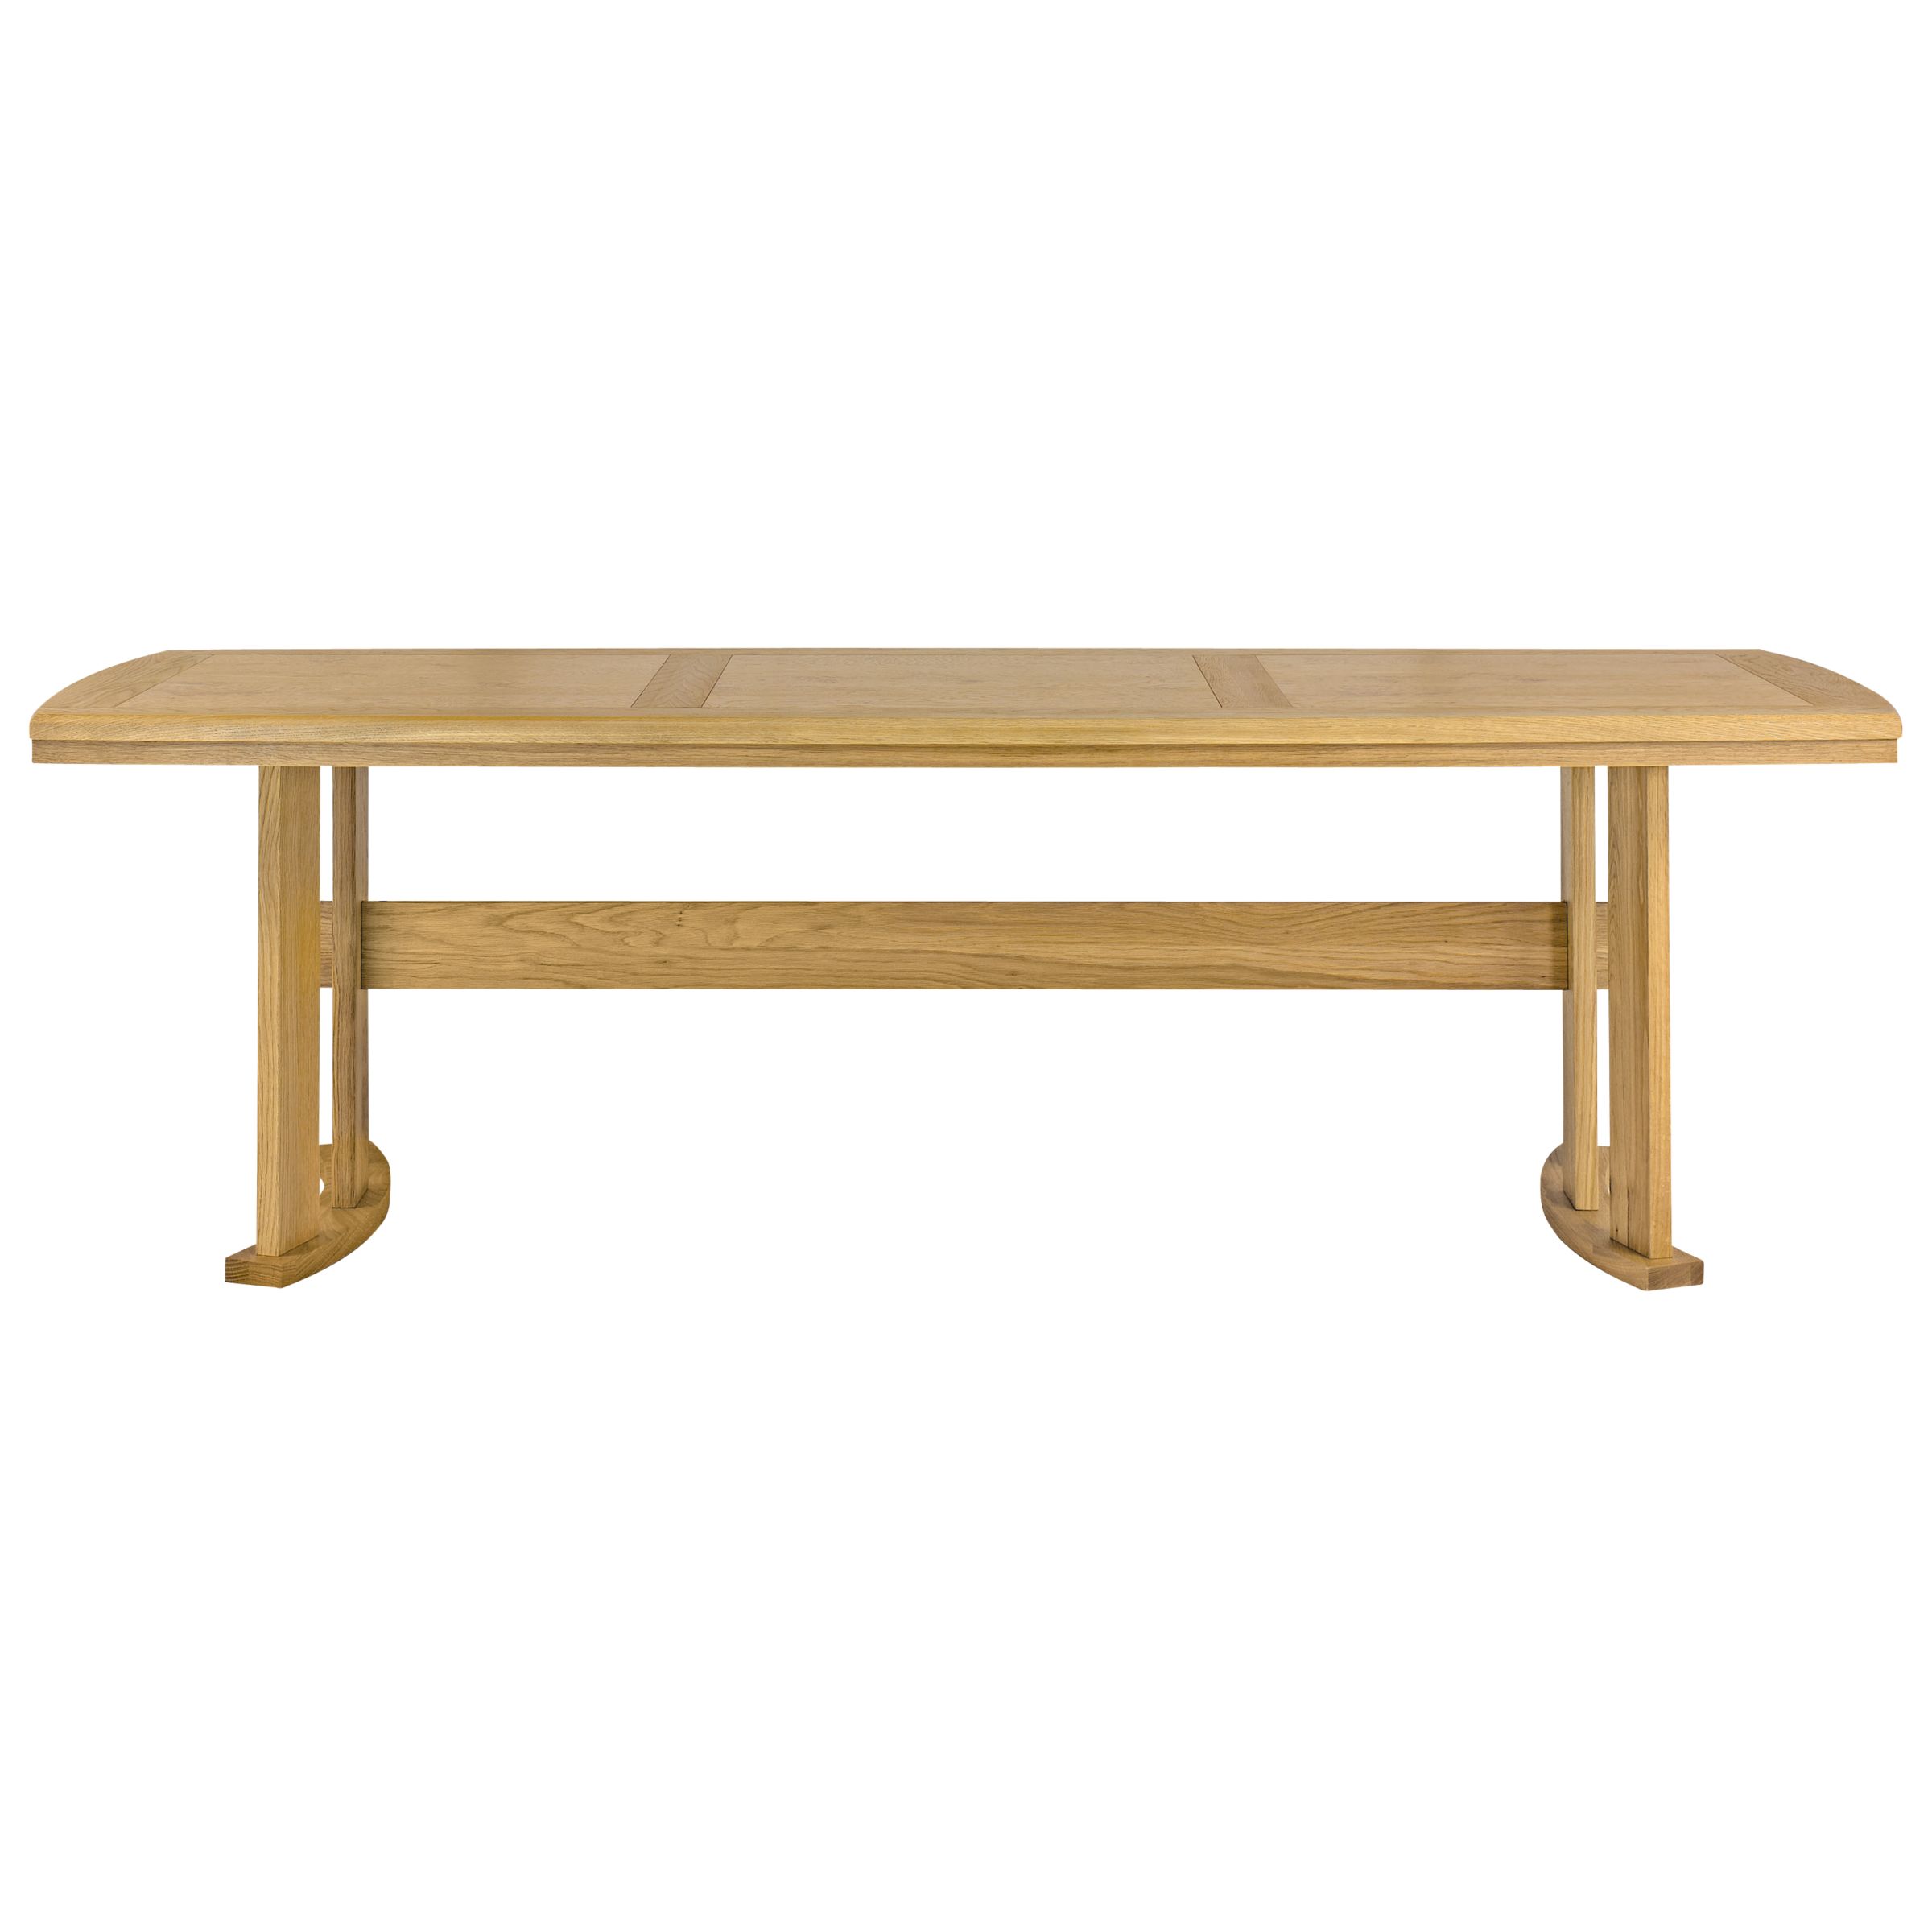 Burford 8 Seat Dining Table